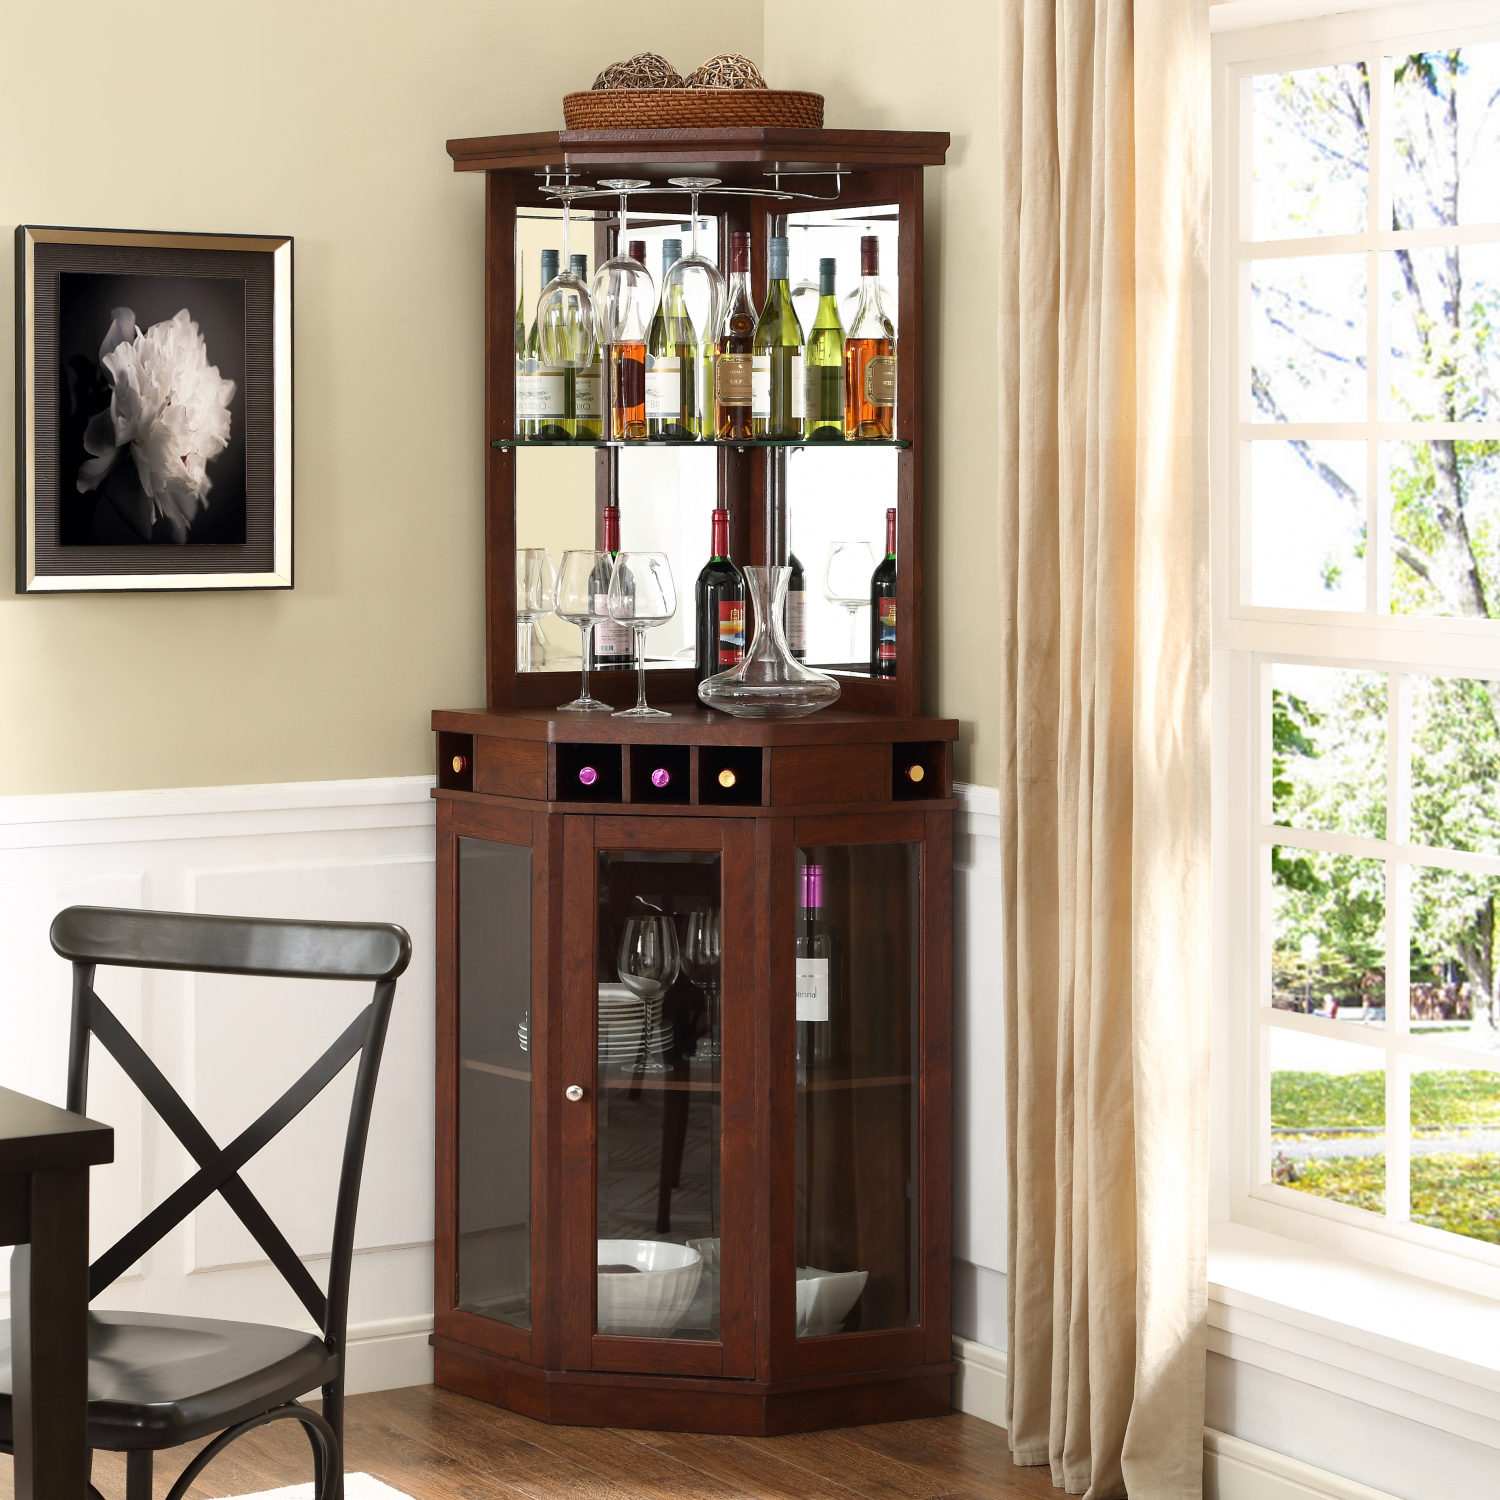 Details About Mini Bars Liquor Cabinet Whiskey Cabinets Wine Storage Wooden Home Bar Furniture with regard to sizing 1500 X 1500